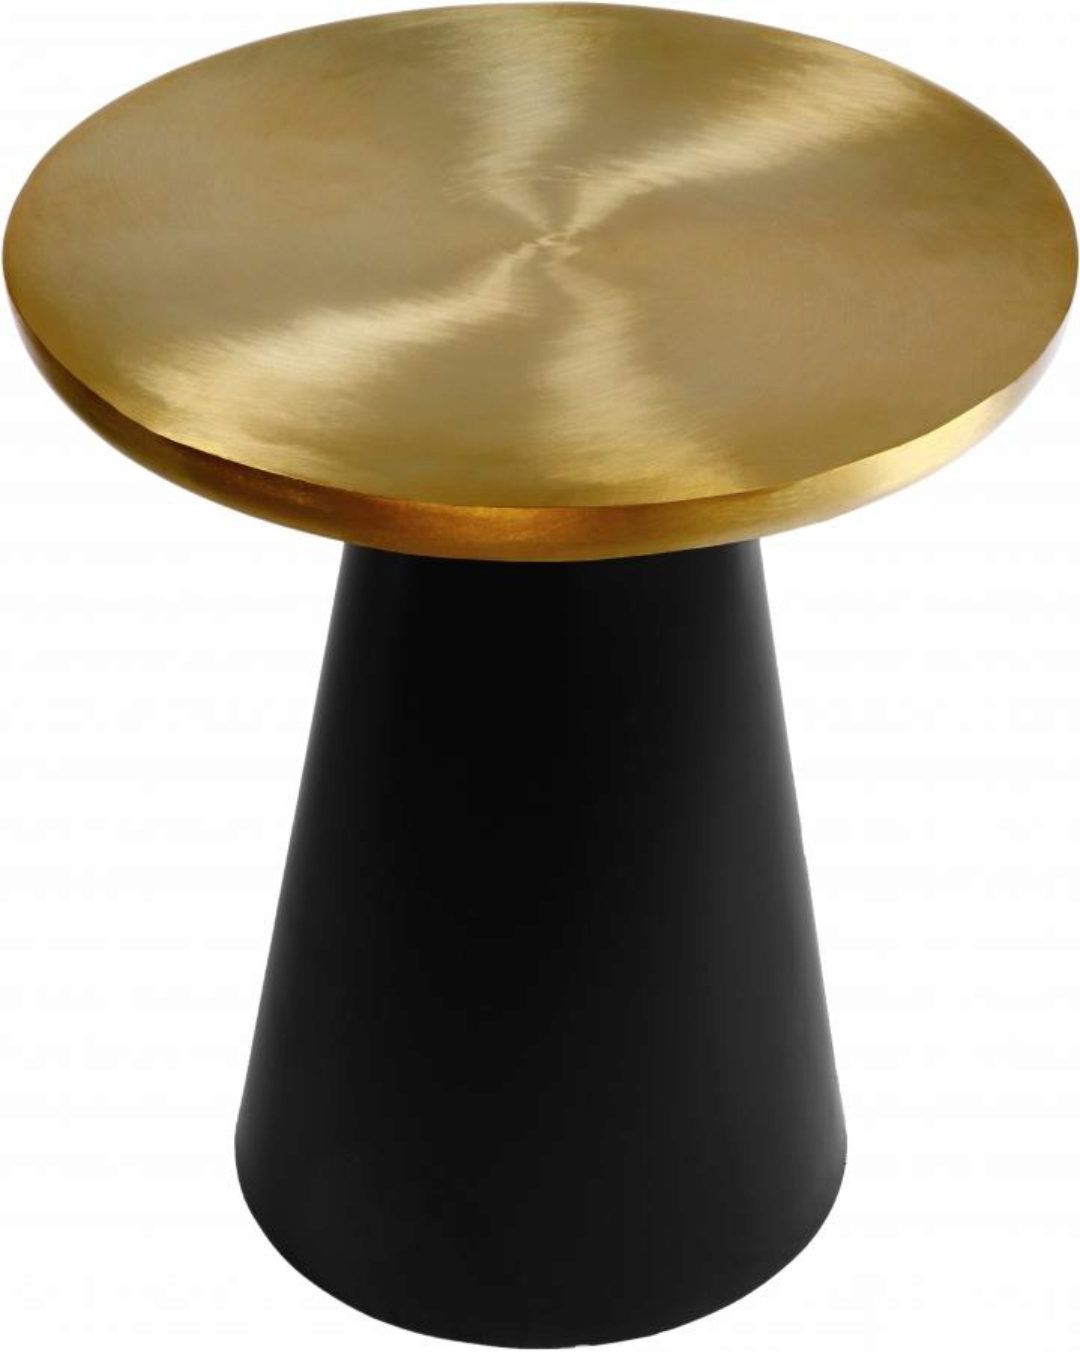 Brushed Gold & Black Metal Coffee Table Set 3pcs Meridian Within Well Known Black And Gold Coffee Tables (Gallery 20 of 20)